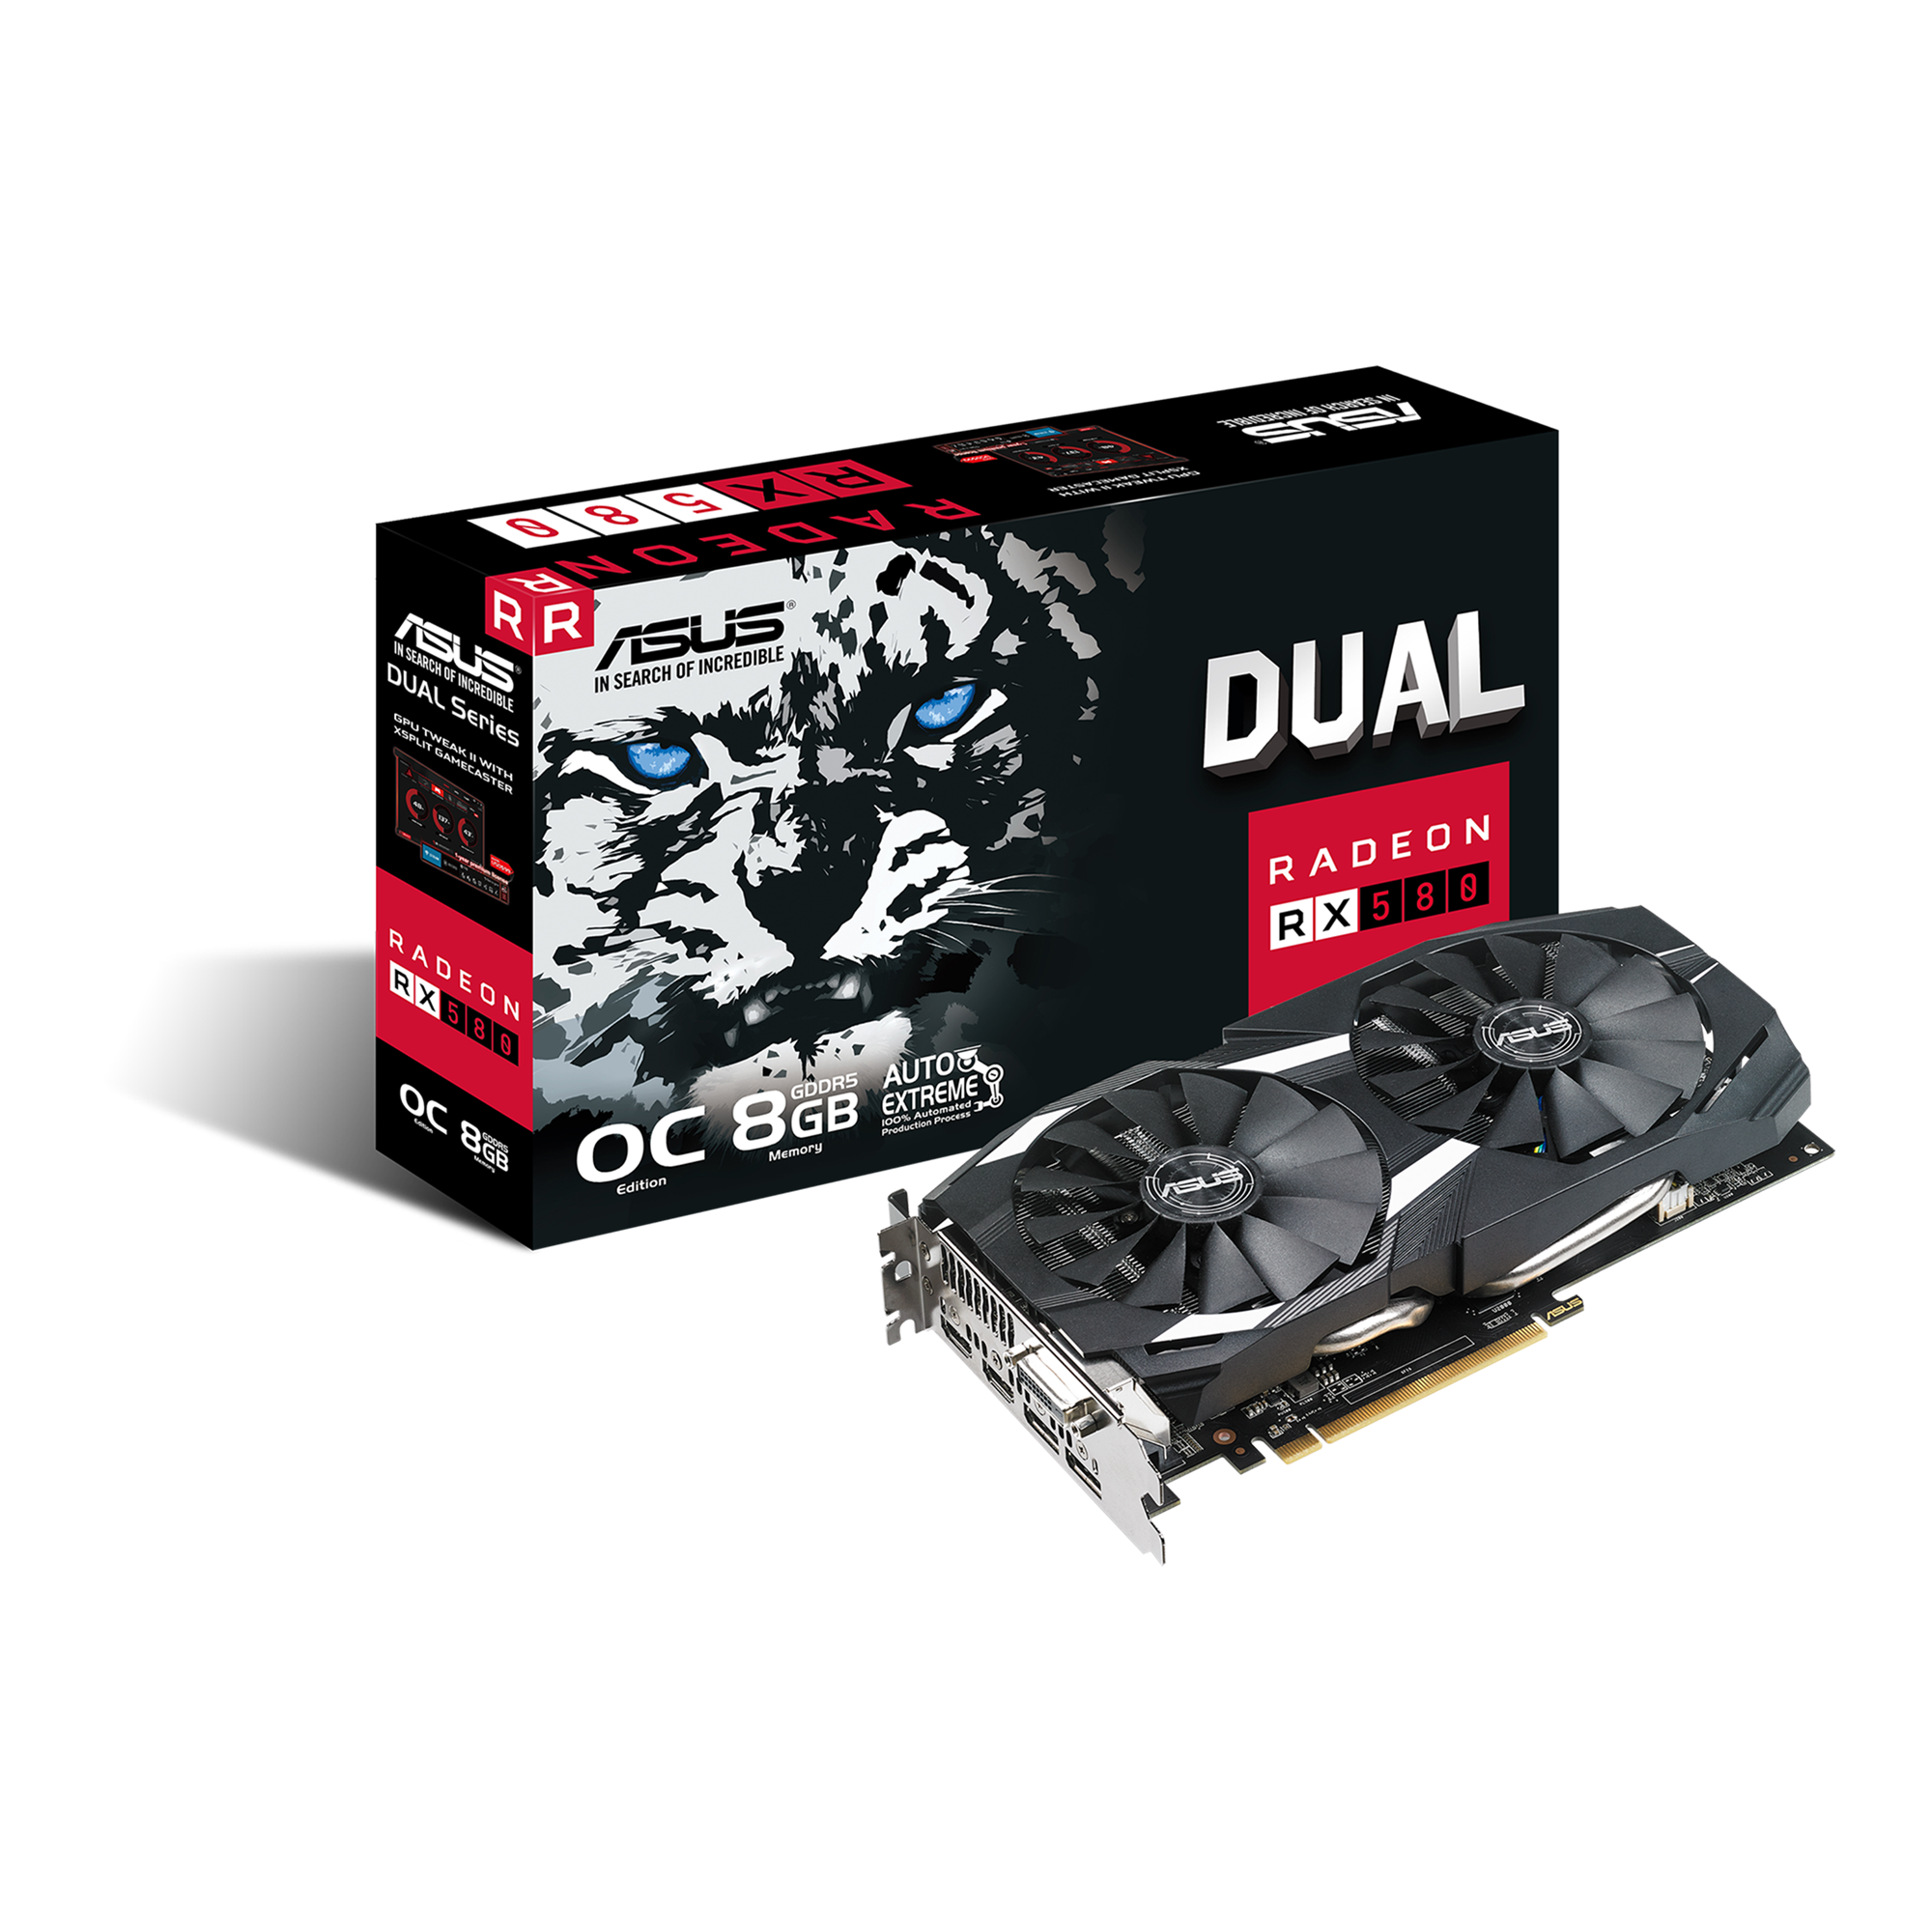 DUAL-RX580-O8G｜Graphics Cards｜ASUS Philippines